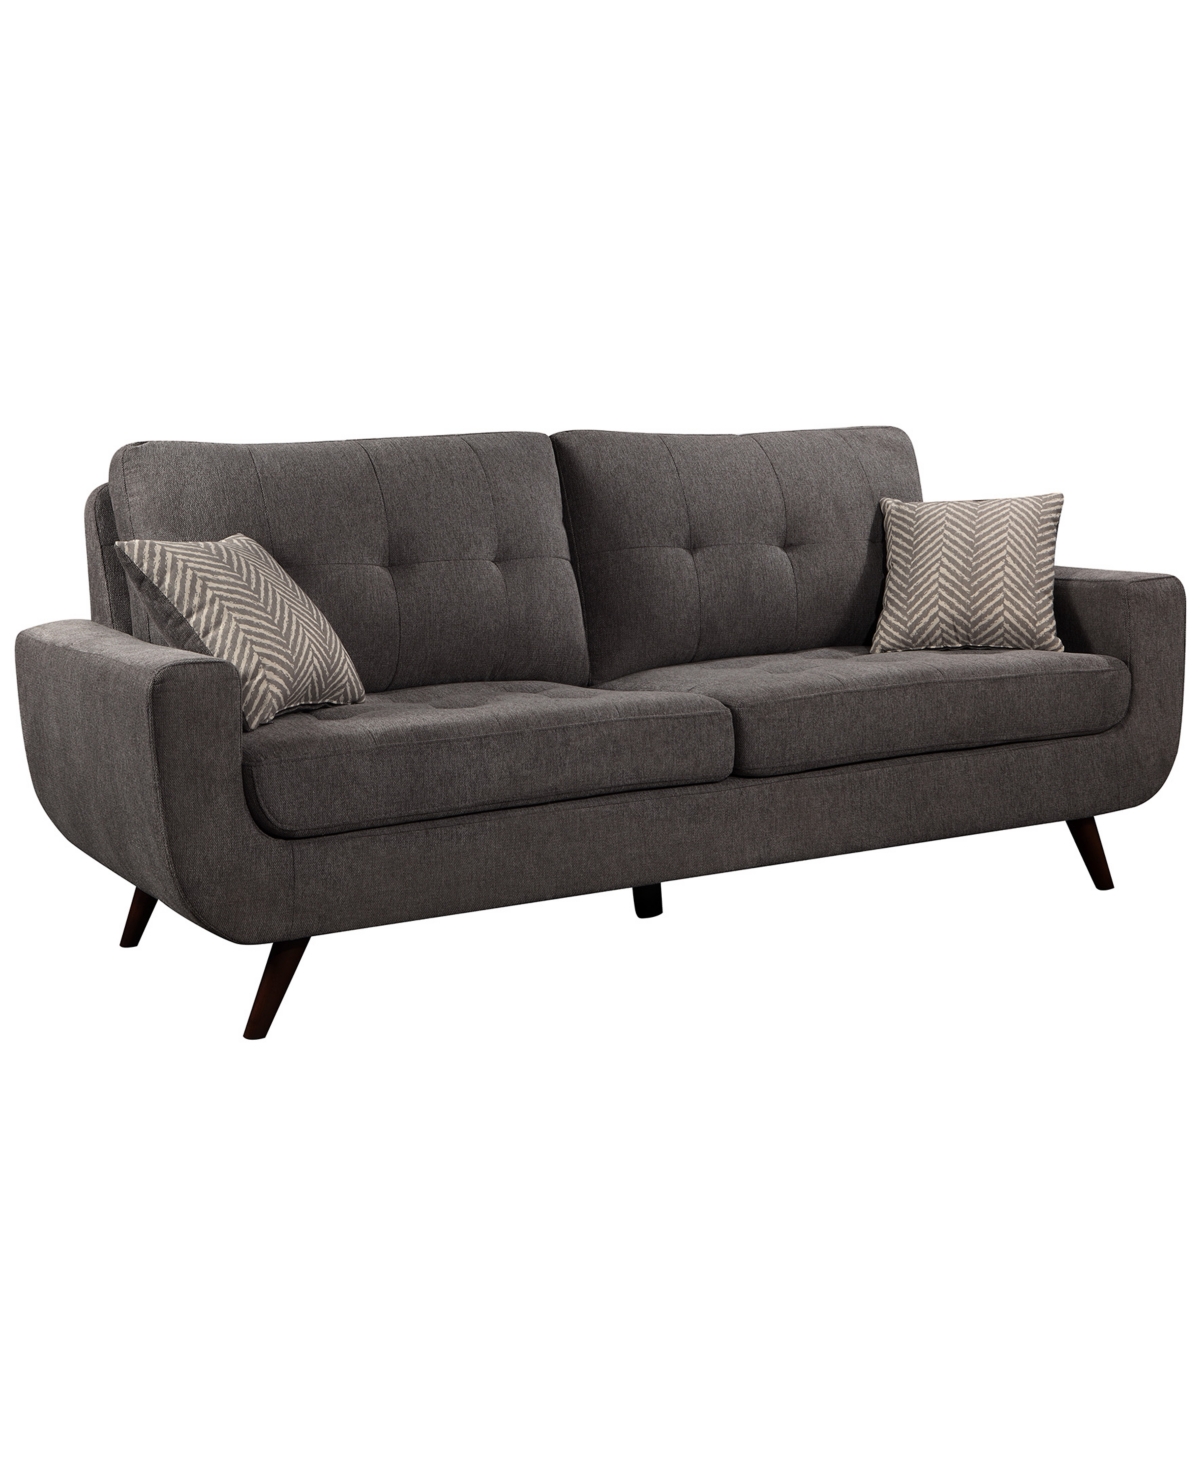 Abbyson Living Paige 85.8" Stain-resistant Fabric Sofa In Gray